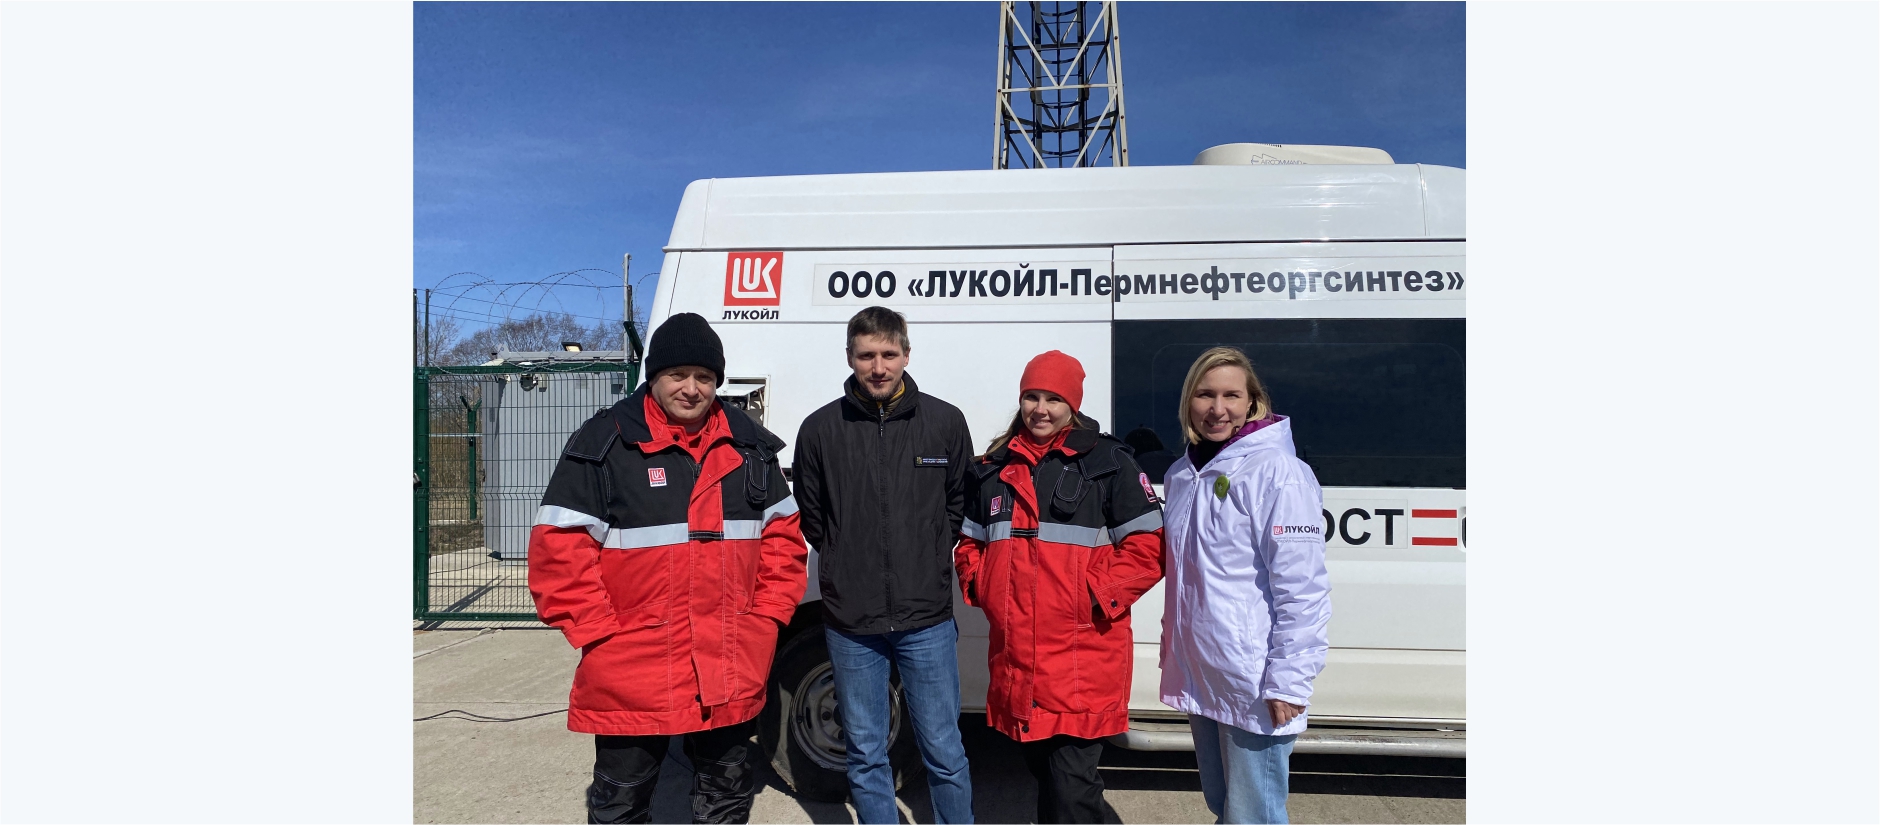 Everything's under control! Open environmental air measurements at LUKOIL-Permnefteorgsintez